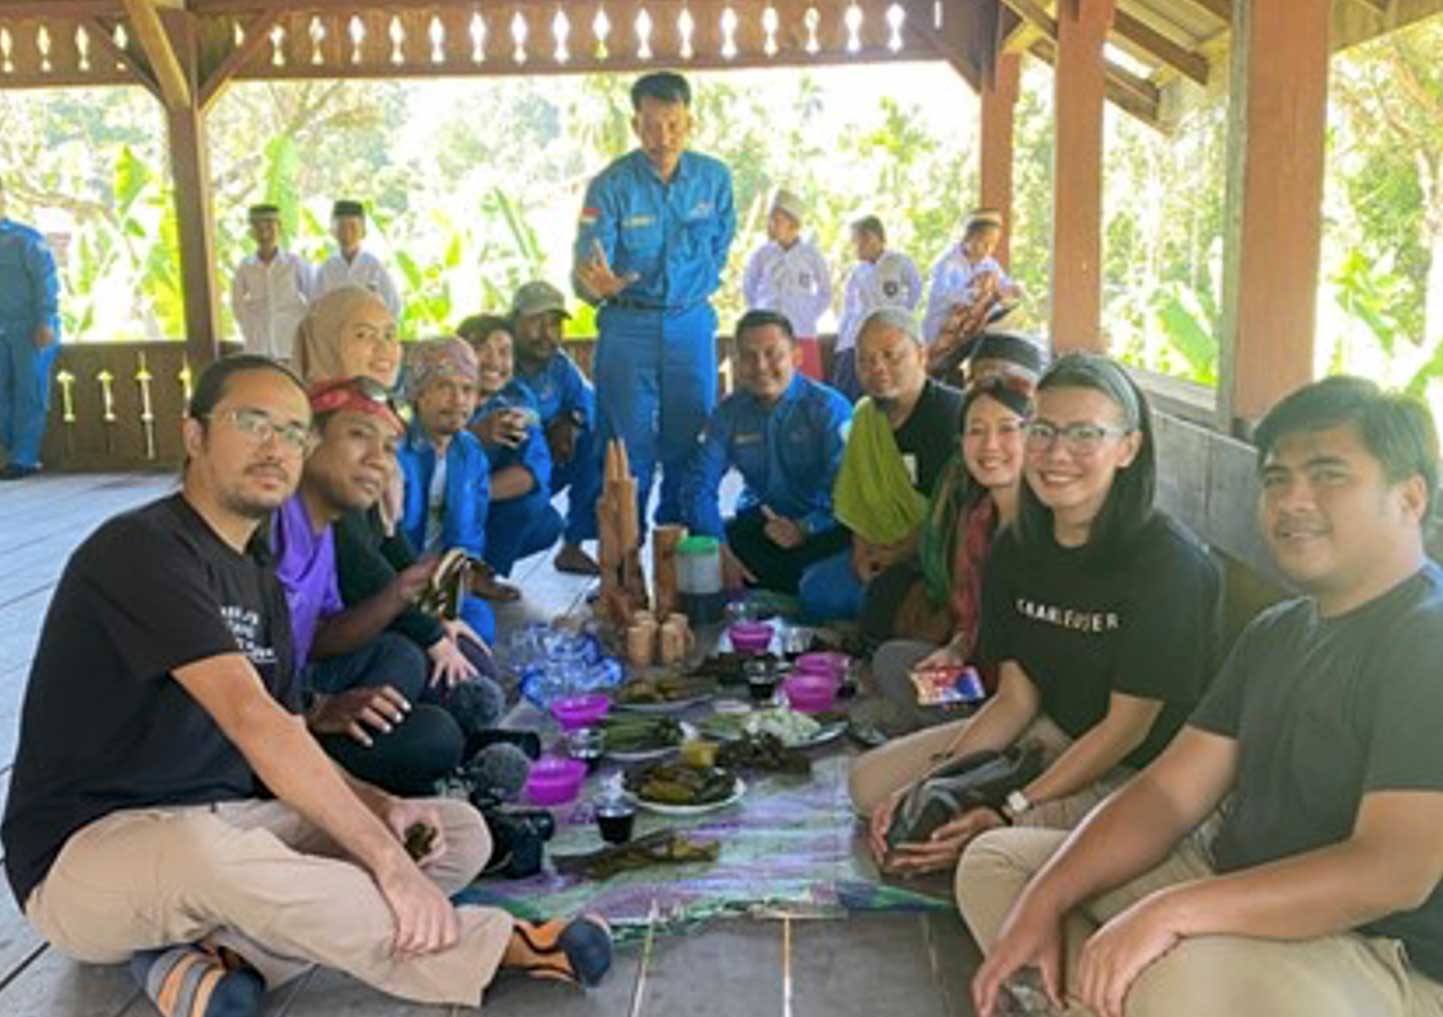 Abex (second right) and Uki Wardoyo (third right) of Indonesia, with the rest of the production crew and staff of Gunung Leuser National Park